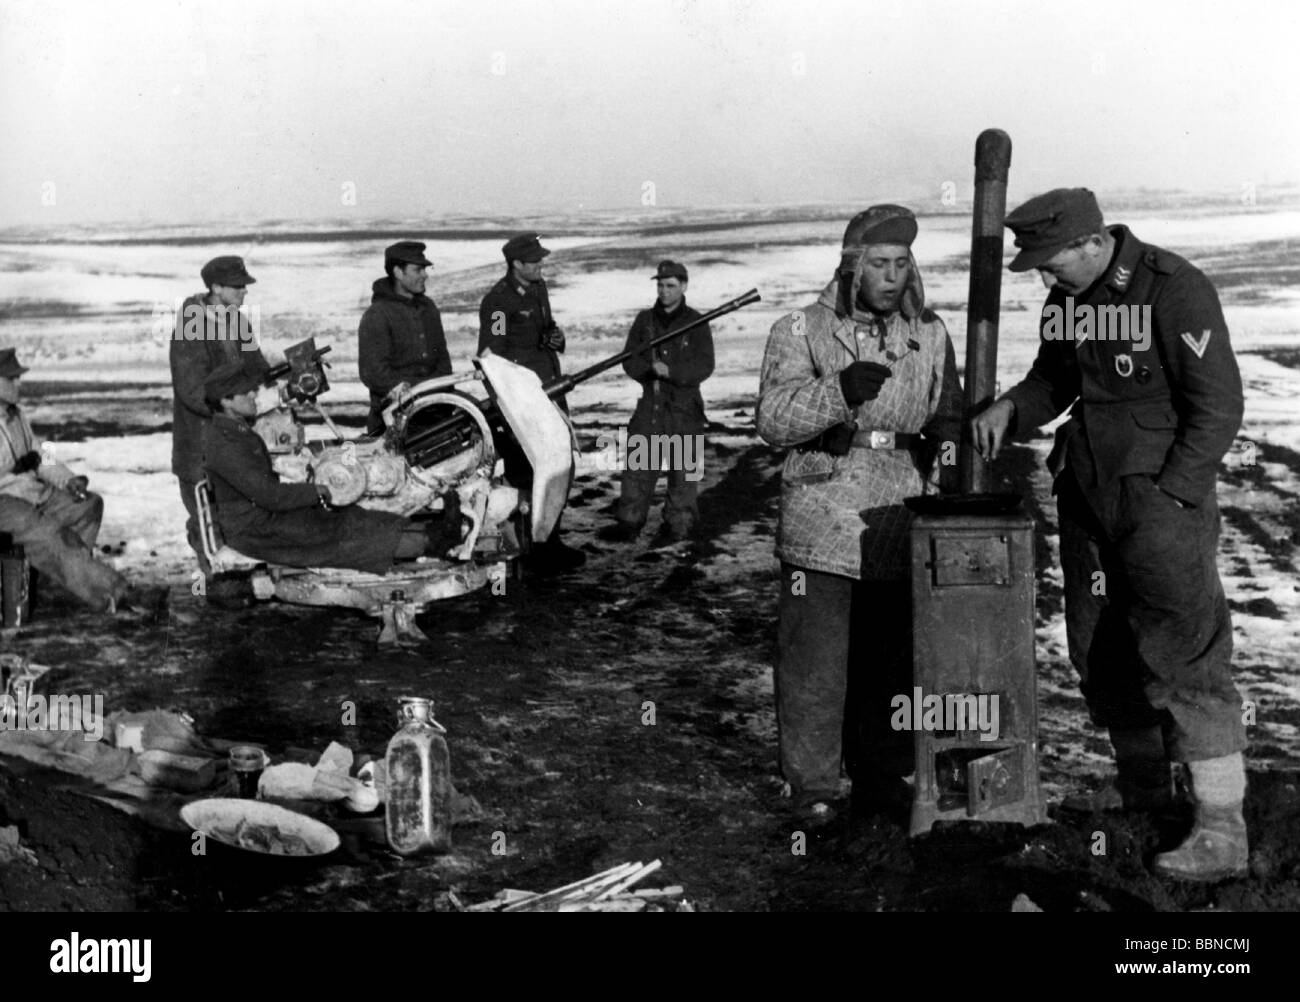 events, Second World War / WWII, Russia 1944 / 1945, German 20 mm anti-aircraft gun in firing position, in the forground a soldier peparing himself a meal on an iron stove, near Britskoye, Ukraine, 24.1.1944, Eastern Front, winter, Wehrmacht, snow, USSR, Luftwaffe, 2 cm Flak 38, soldiers, winter clothes, clothing, AA, 20th century, historic, historical, Soviet Union, Army Group South, eating, people, 1940s, Stock Photo